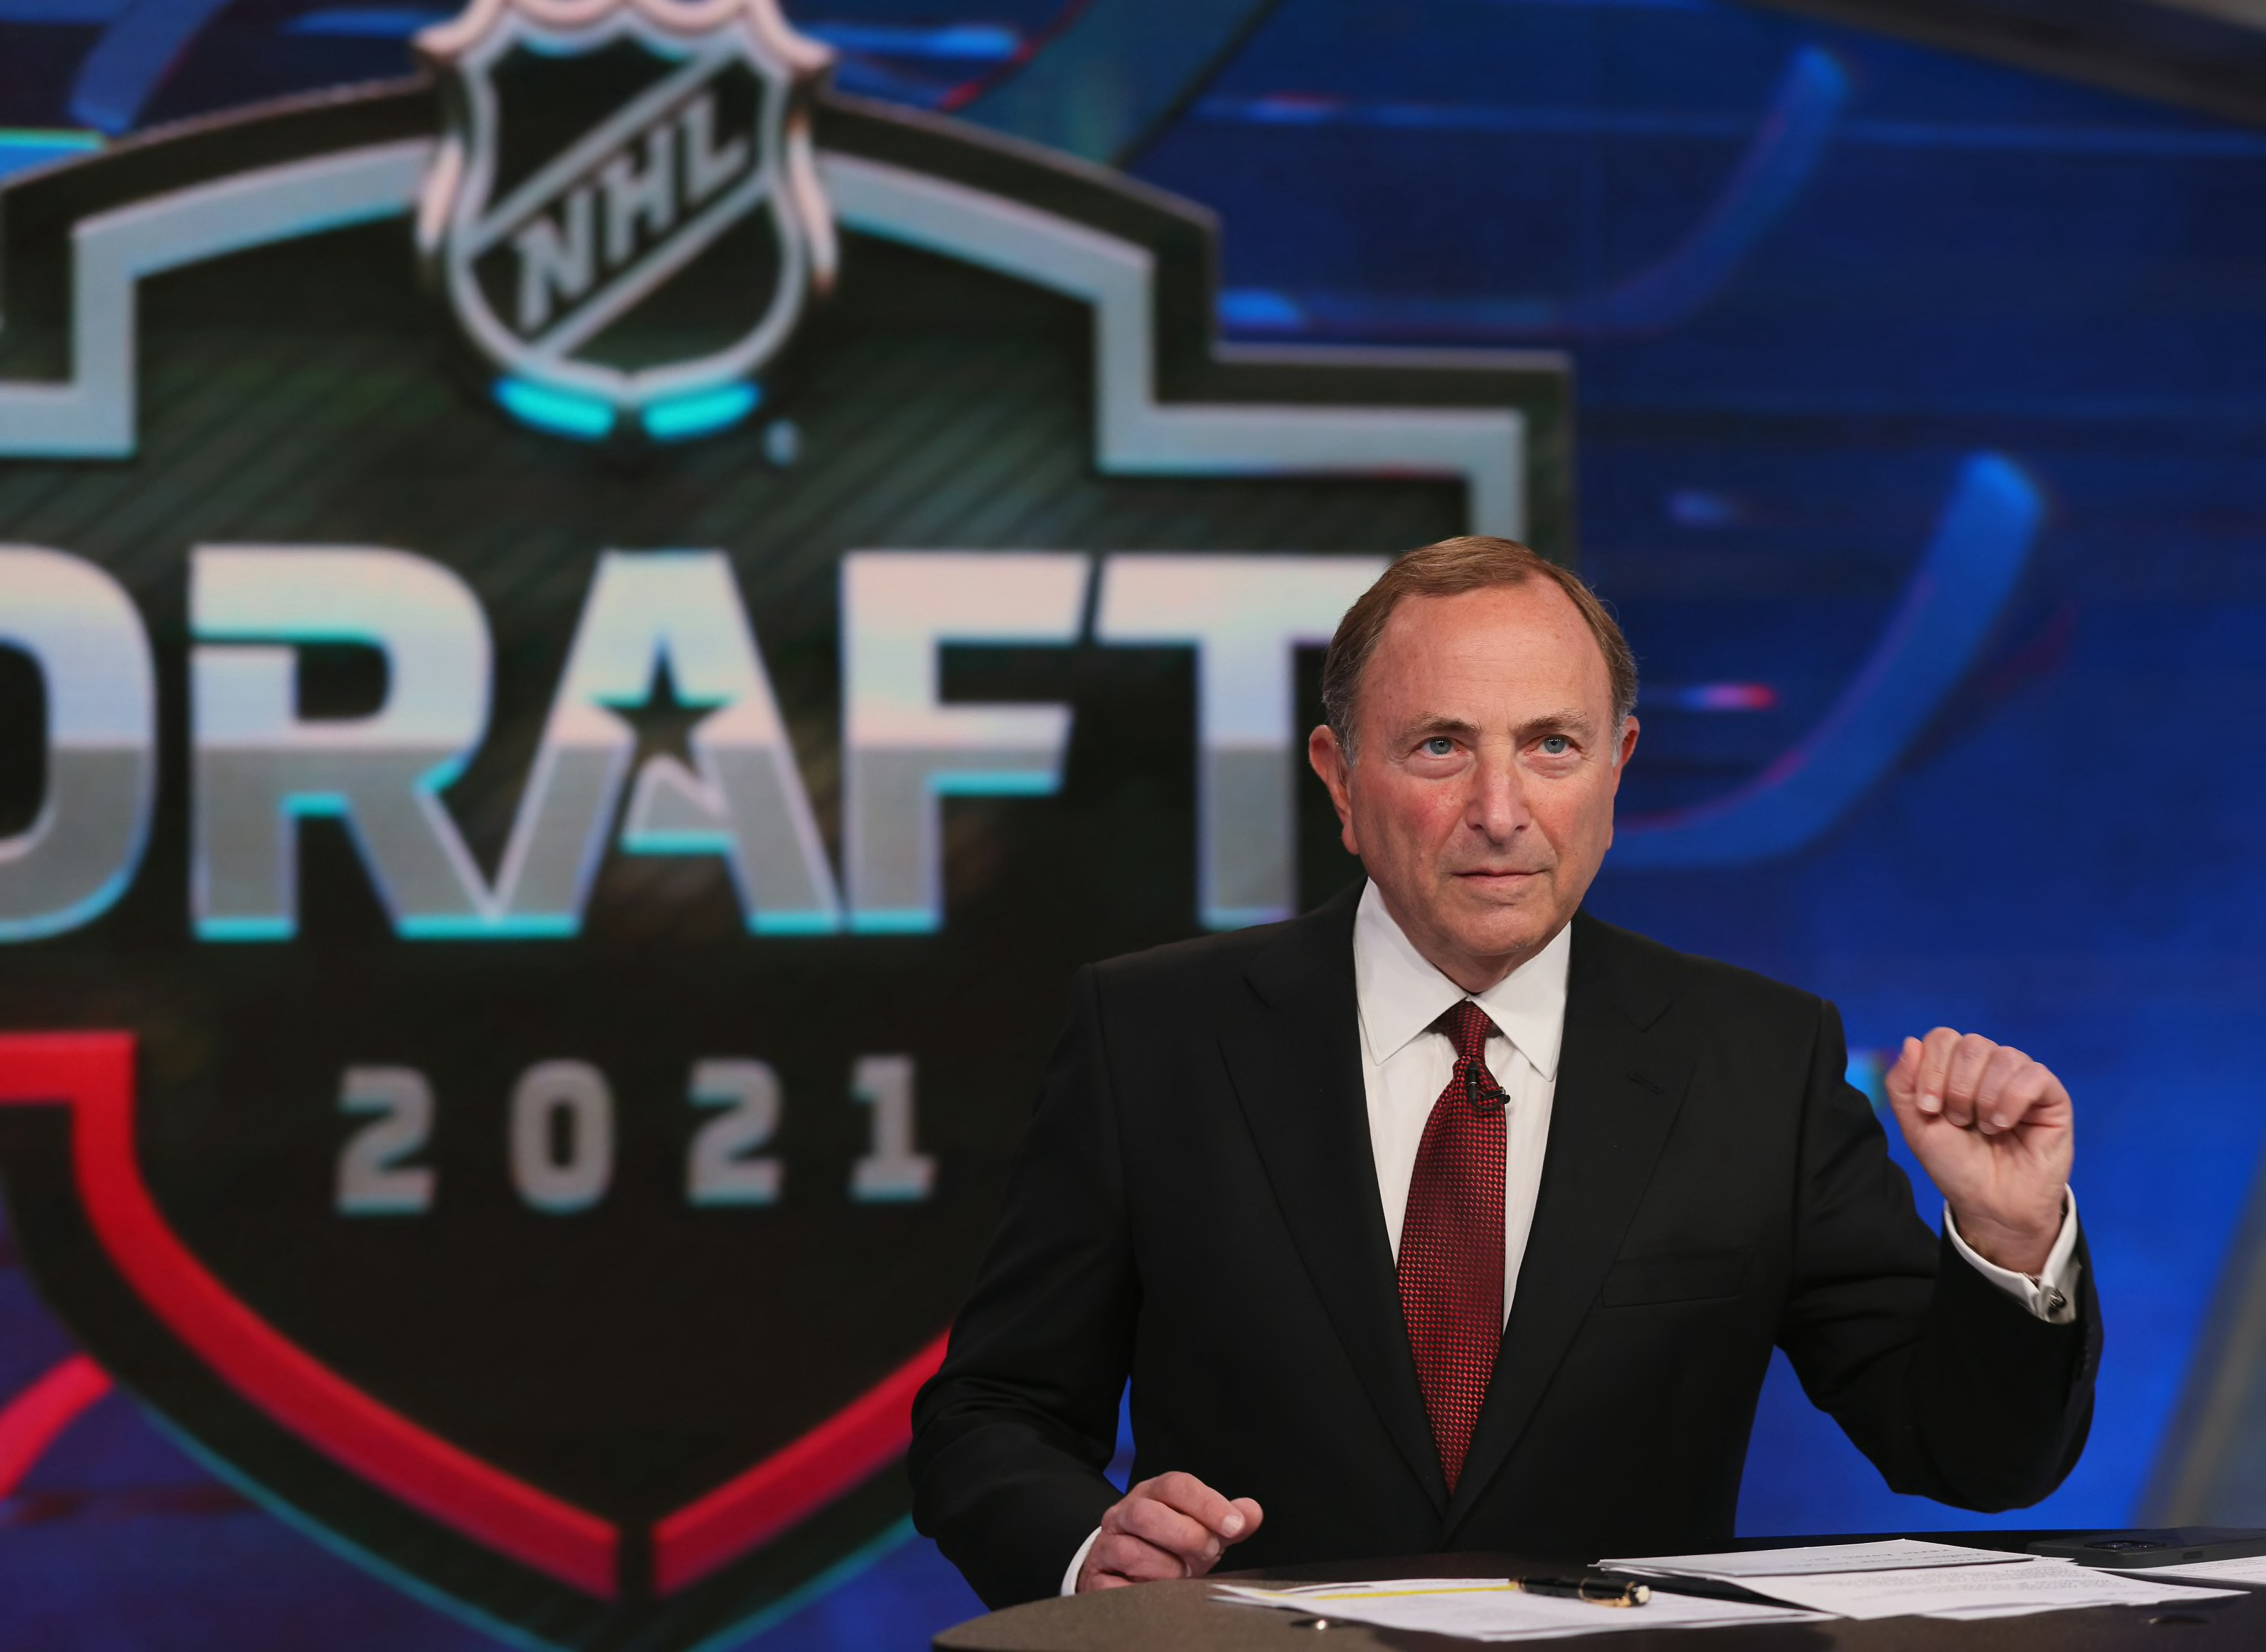 2021 NHL Entry Draft Day 2 Date, Time, TV Schedule, Draft Order, More